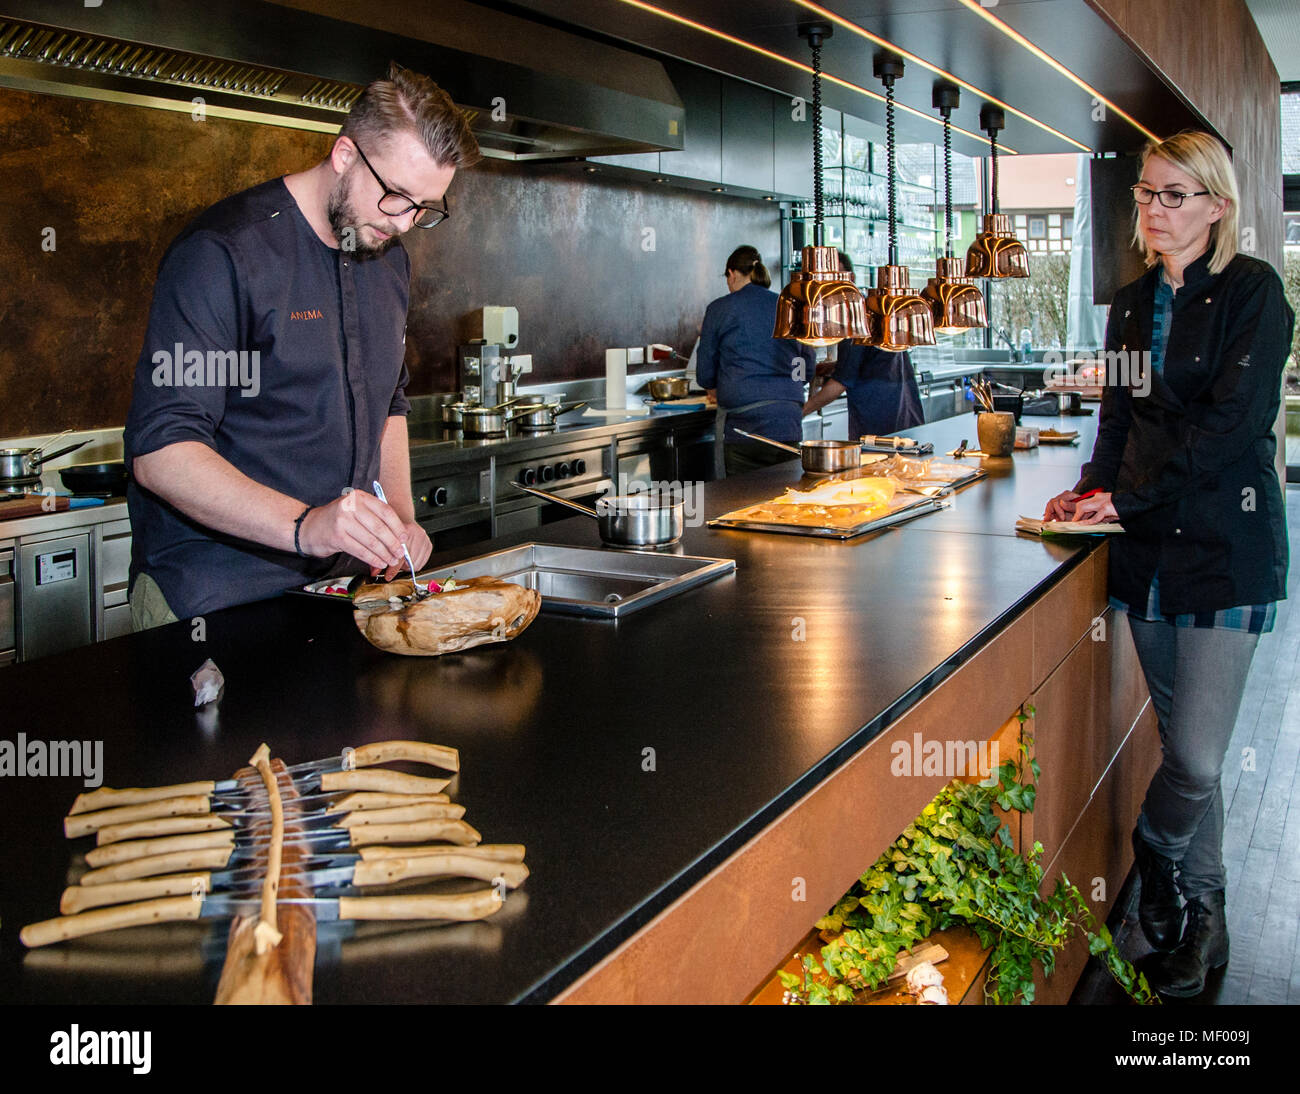 Heiko Lacher's team is easily manageable, because the star chef and his two cooks work behind a long open kitchen that flanks the entire dining room. Miso Dish prepared by German Michelin Star Chef Heiko Lacher. Restaurant Anima in Tuttlingen, Germany Stock Photo